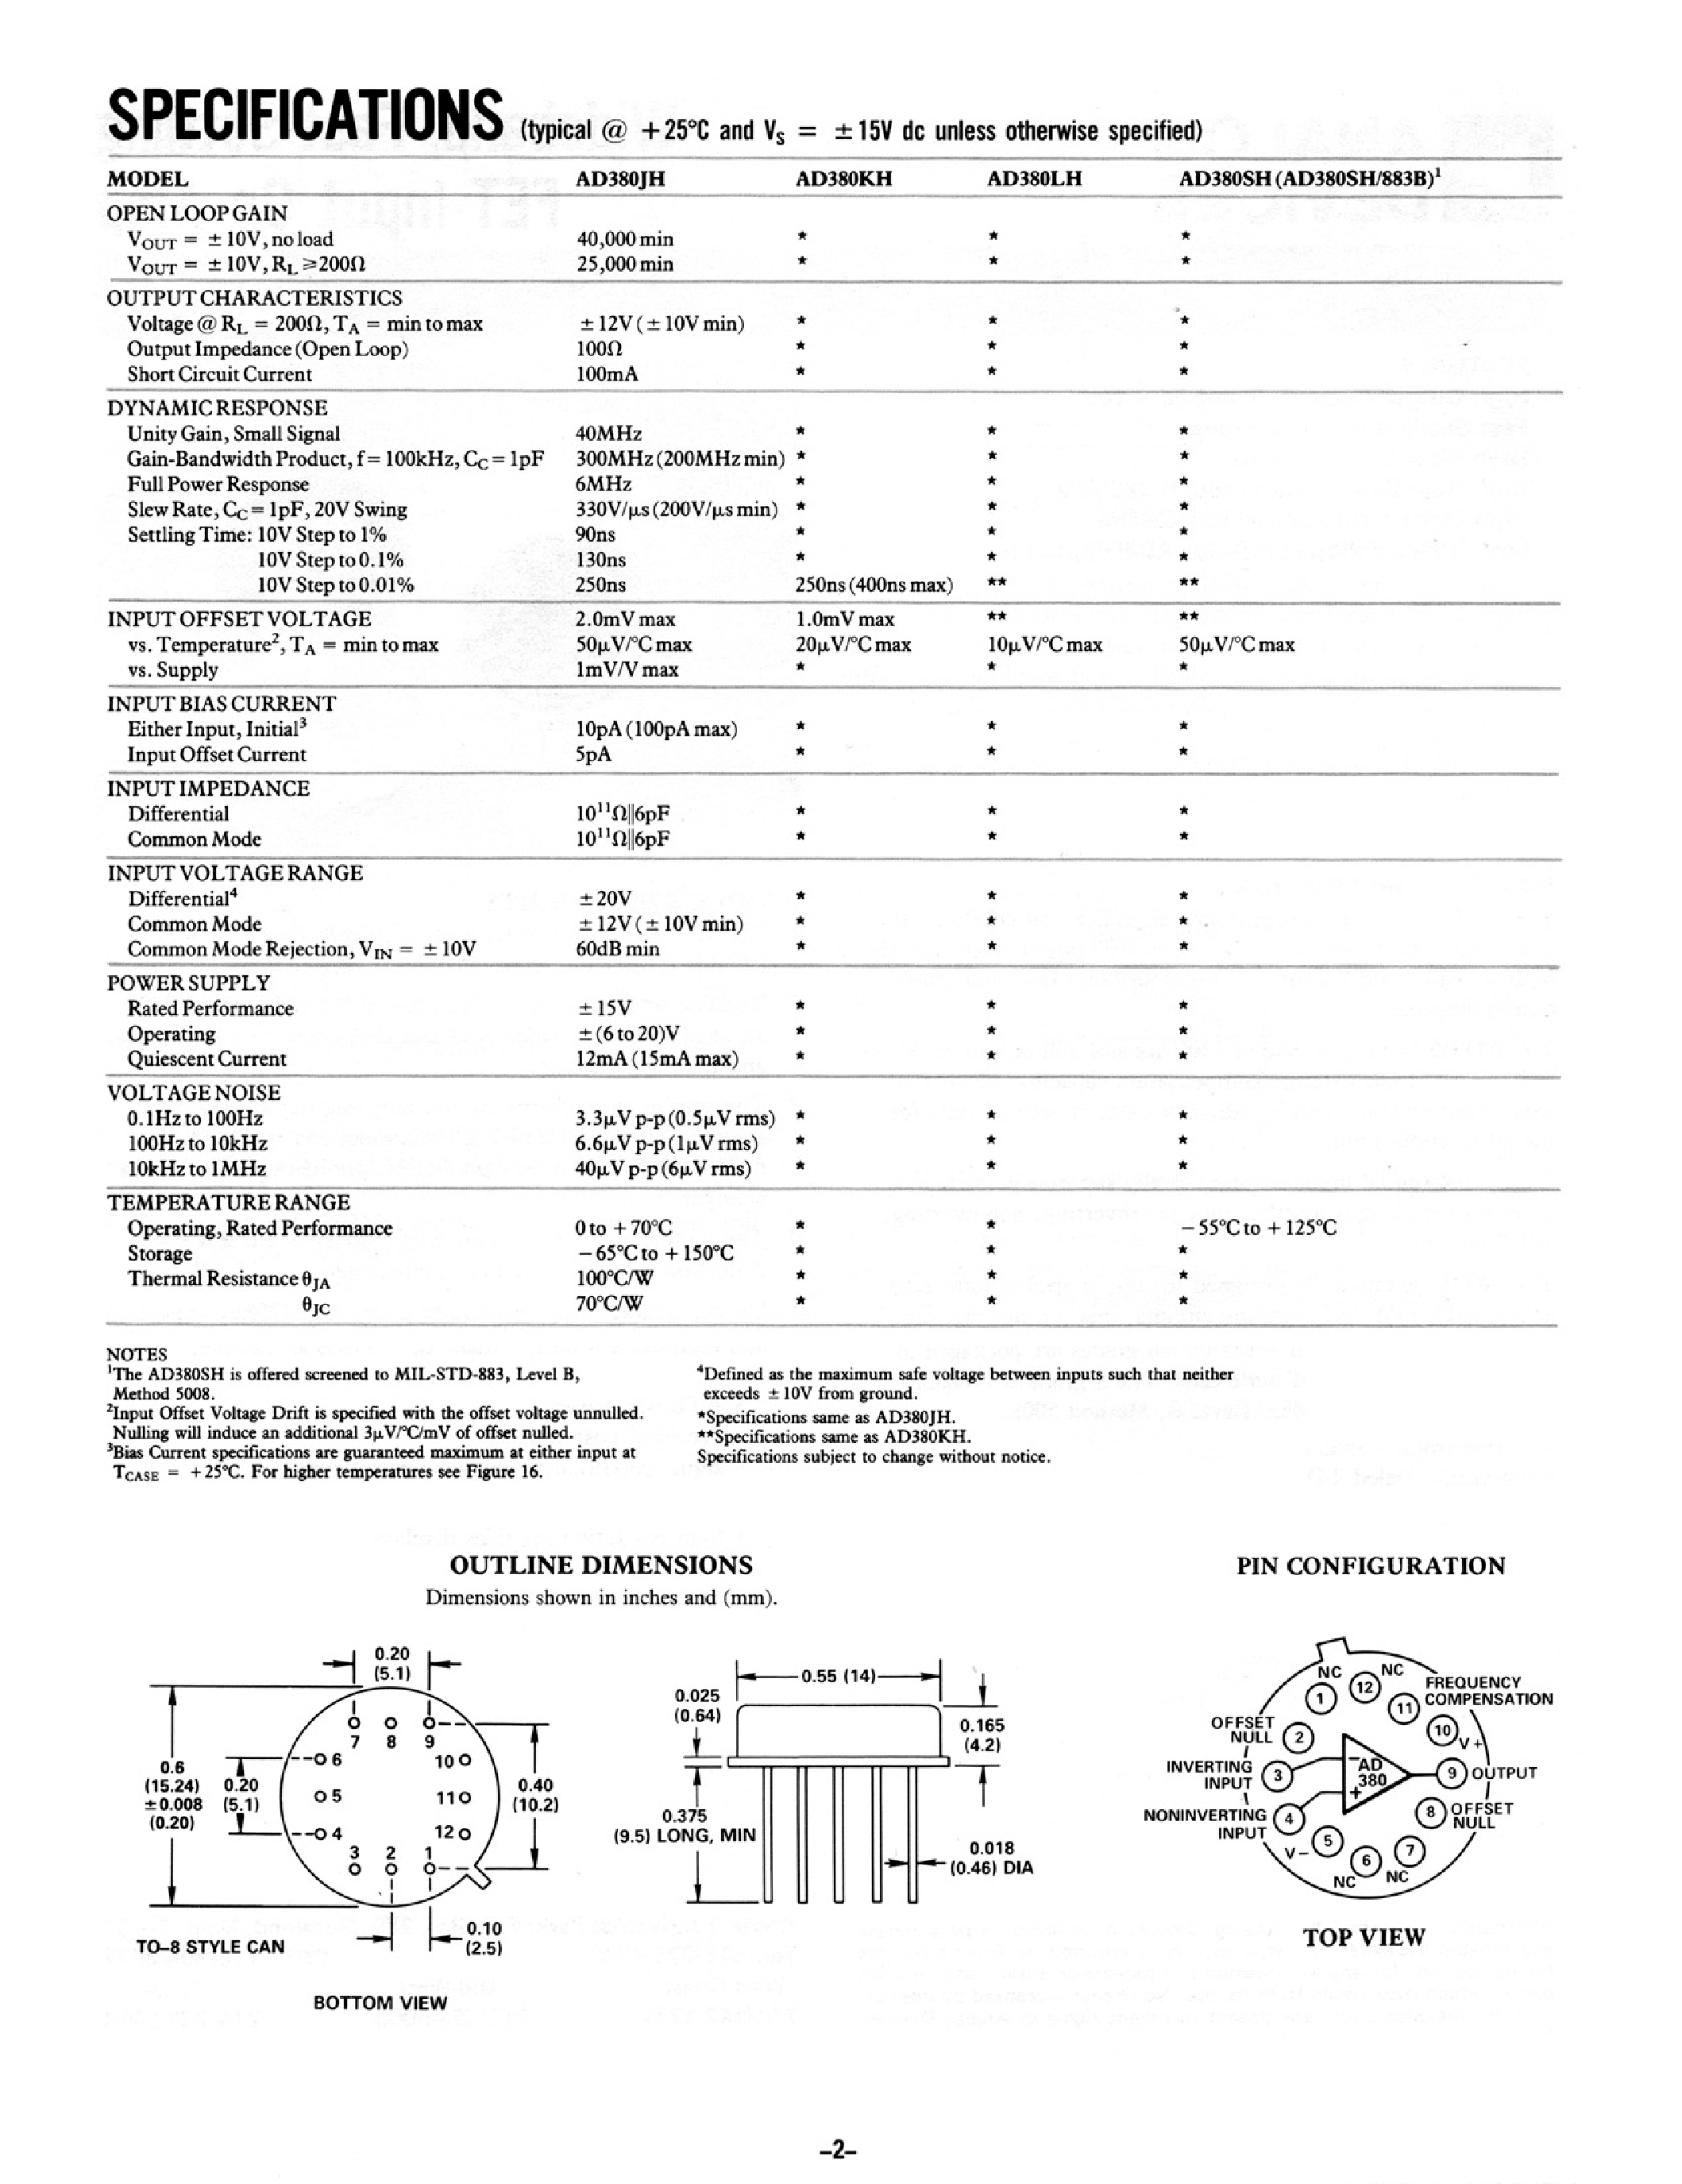 Datasheet AD380 - WIDEBAND/ FAST-SETTING FET-INPUT OP AMP page 2